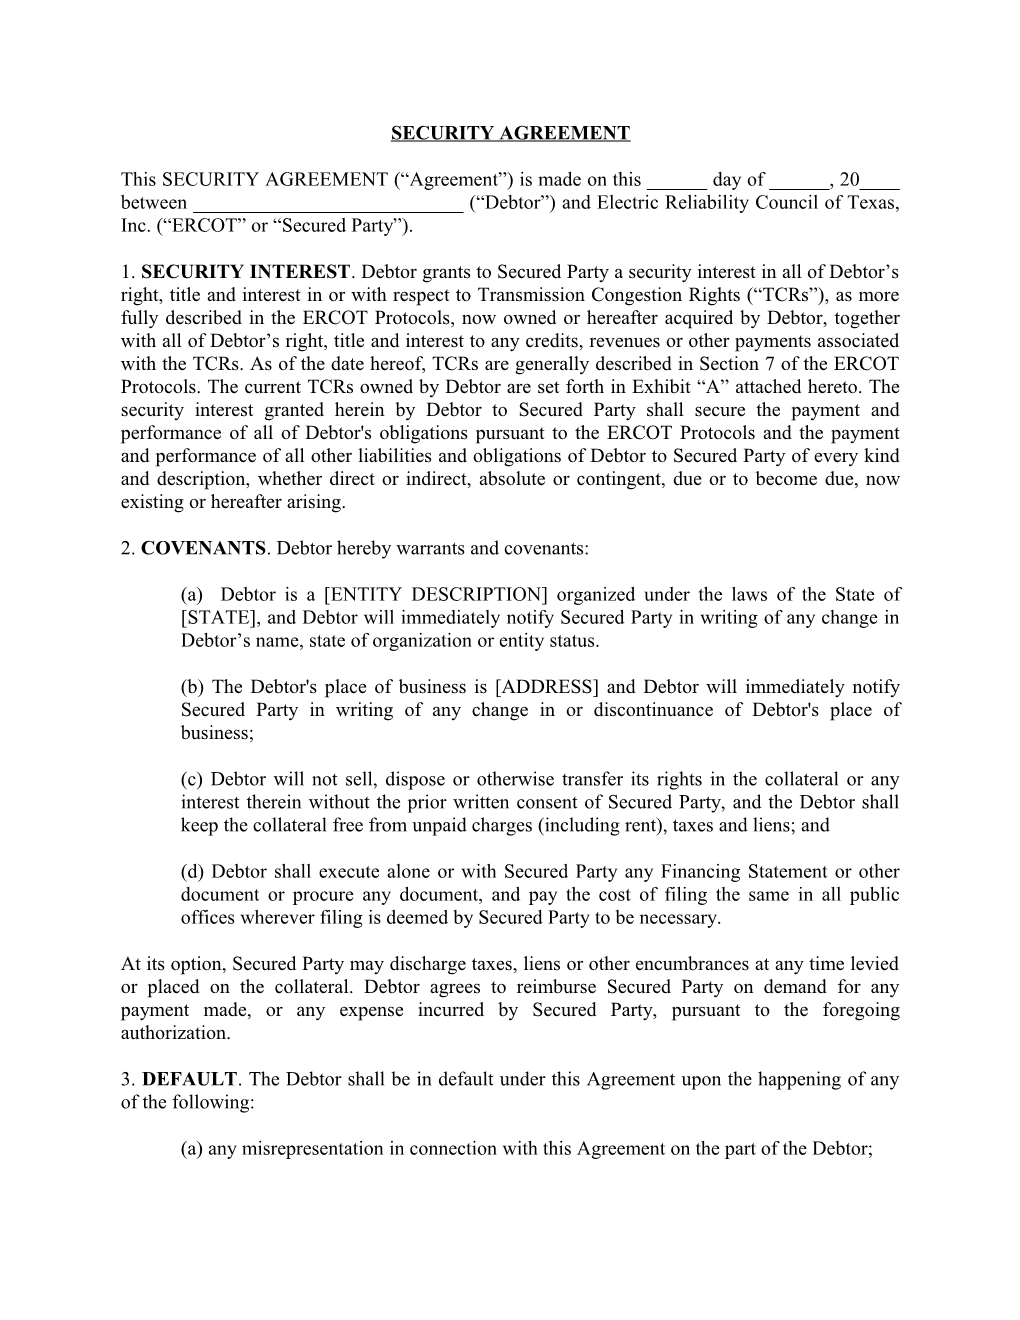 Security Agreement s1